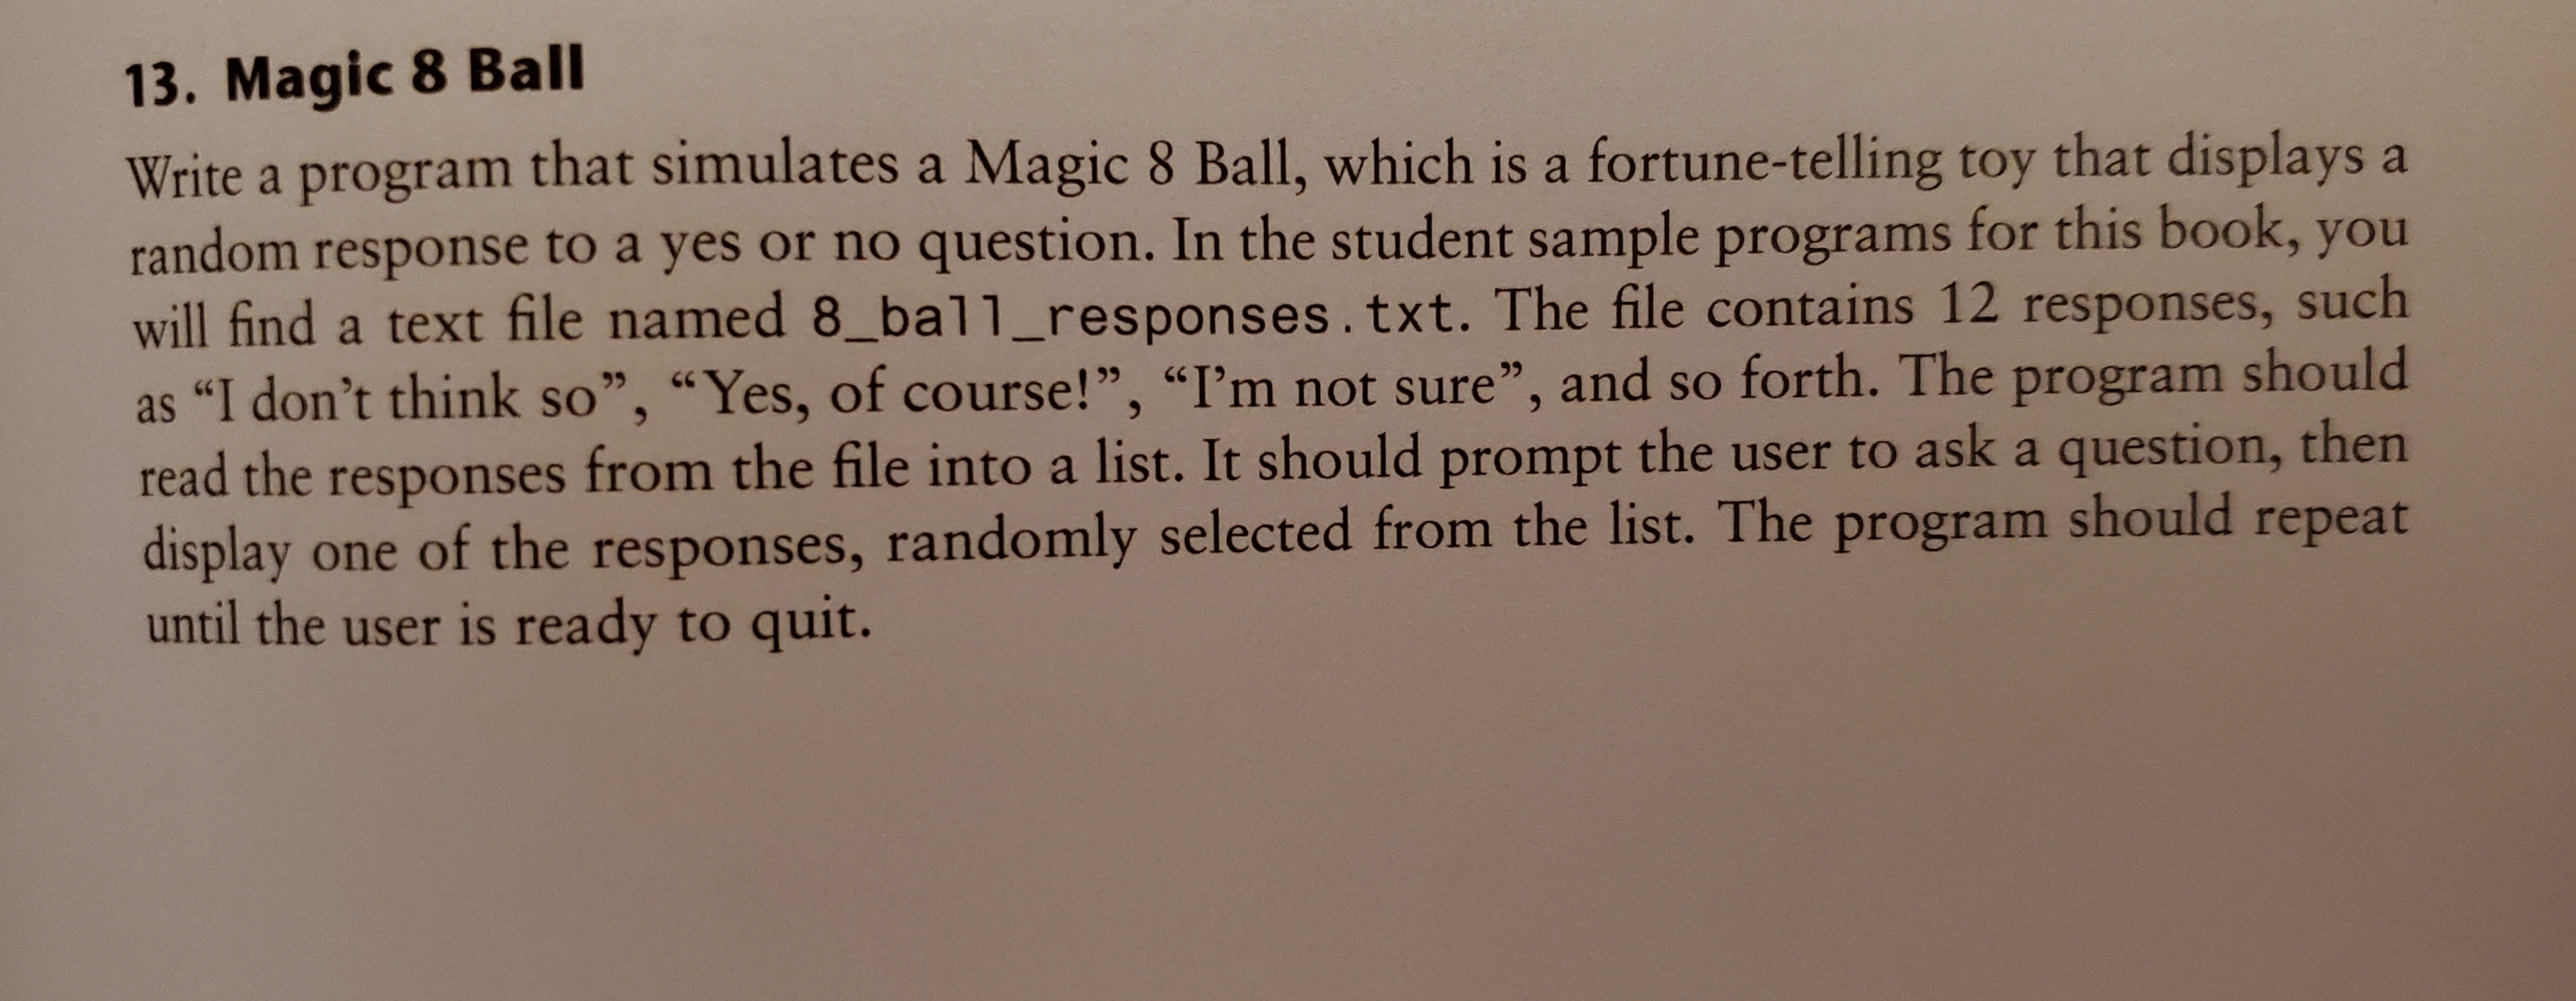 13. Magic 8 Ball
Write a program that simulates a Magic 8 Ball, which is a fortune-telling toy that displays a
random response to a yes or no question. In the student sample programs for this book, you
will find a text file named 8_ball_responses.txt. The file contains 12 responses,
as "I don't think so", "Yes, of course!", "I'm not sure", and so forth. The program should
read the responses from the file into a list. It should prompt the user to ask a question, then
display one of the responses, randomly selected from the list. The program should repeat
until the user is ready to quit.
such
99
